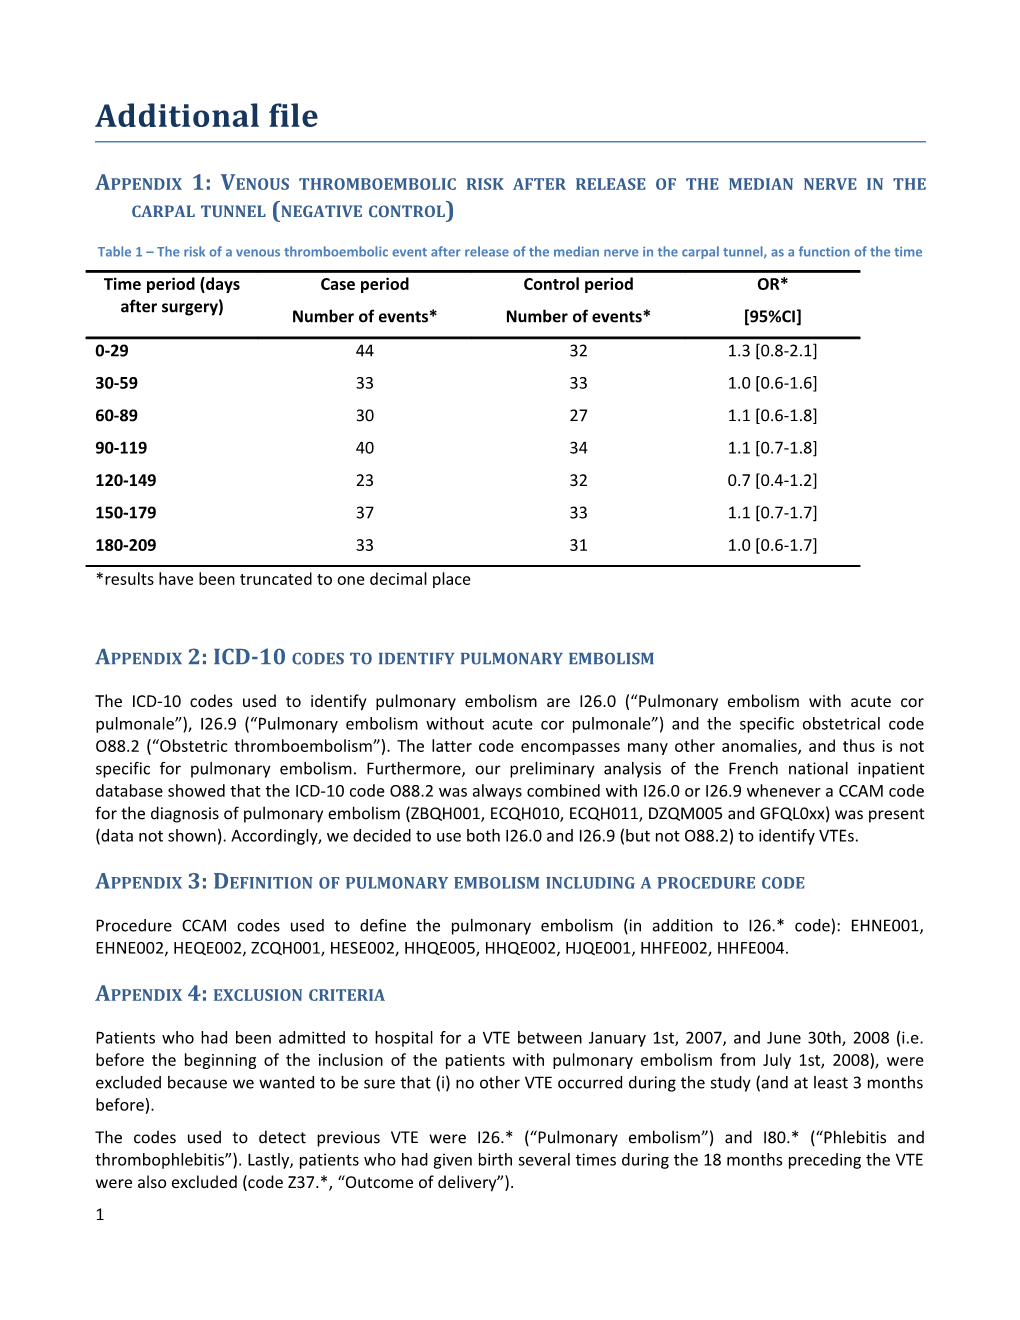 Appendix 2: ICD-10 Codes to Identify Pulmonary Embolism